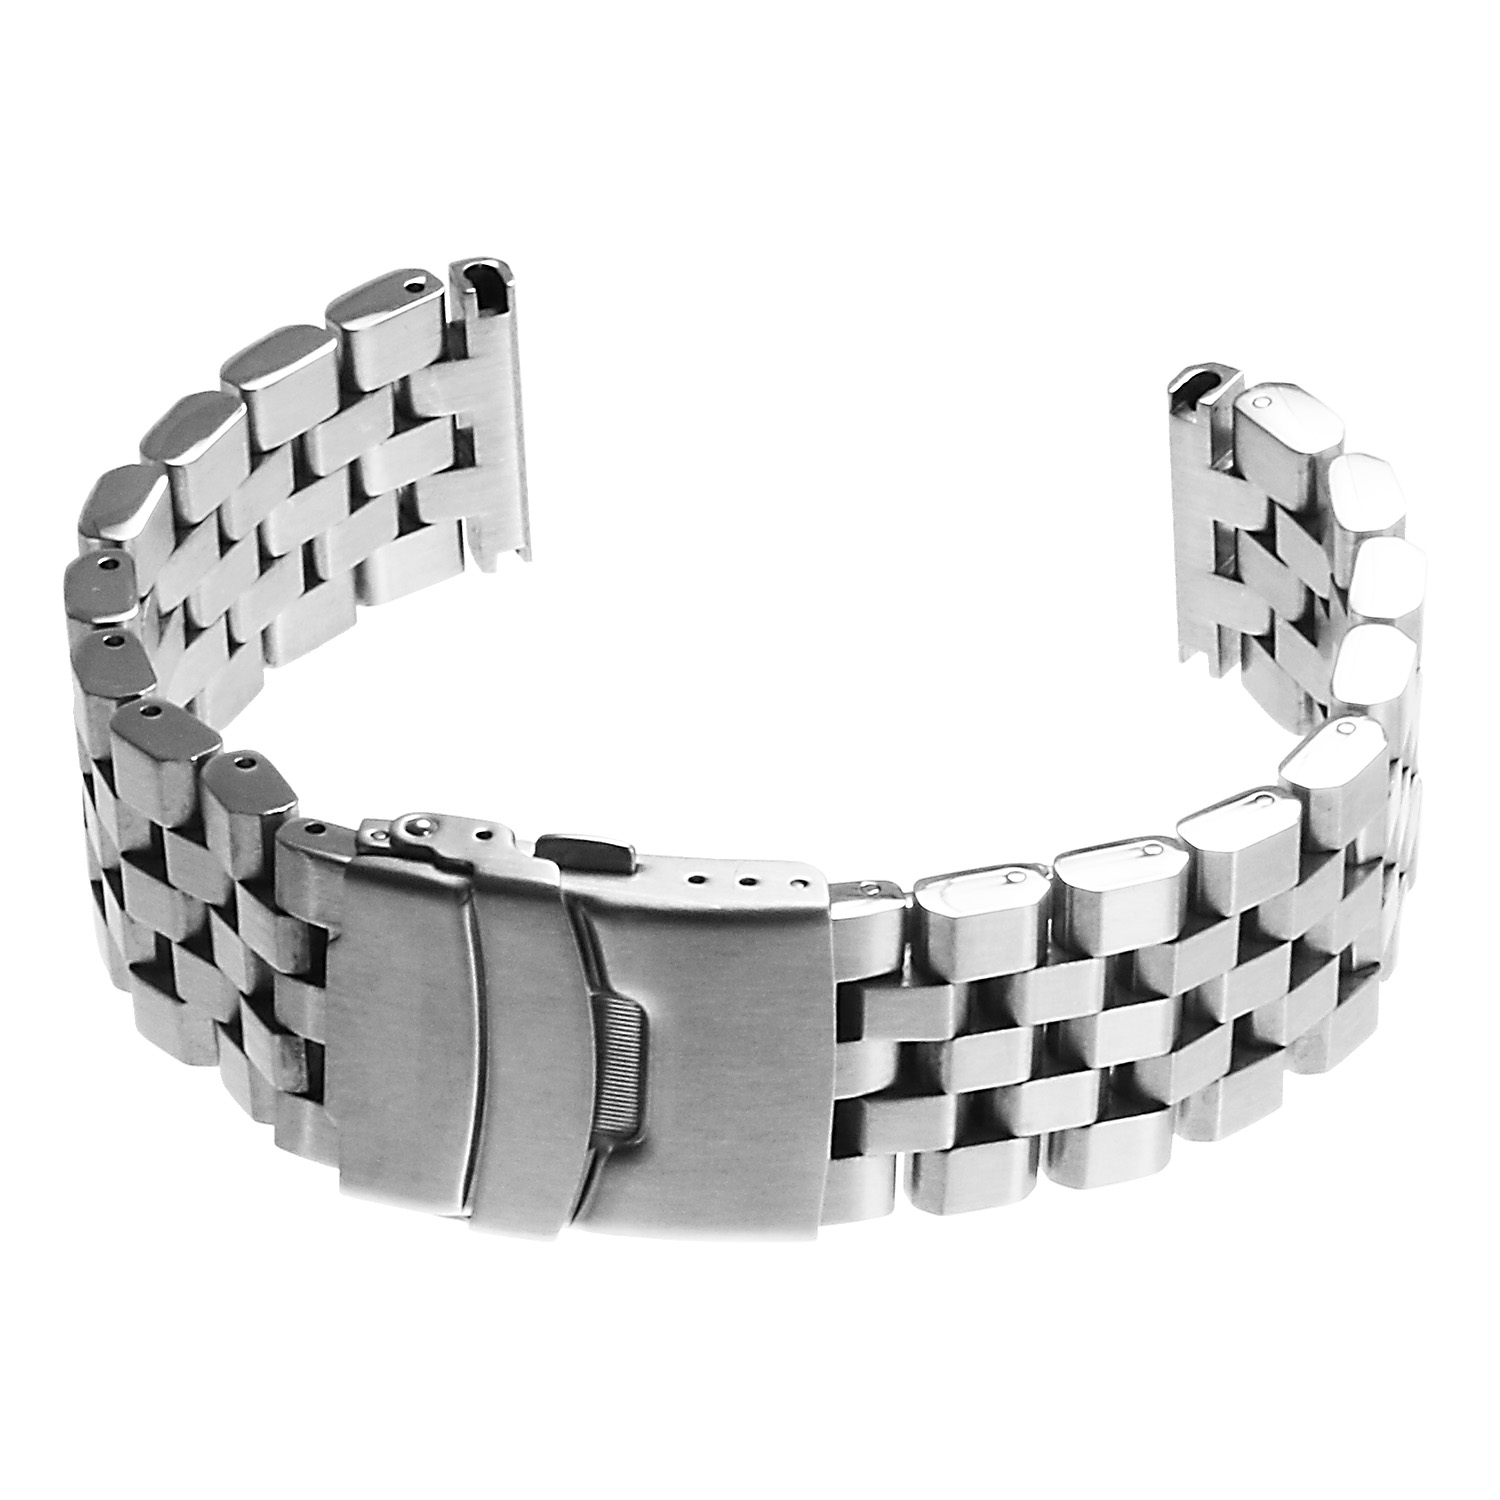 m8.ss Main Closed Silver StrapsCo Super Engineer II Stainless Steel Metal Watch Band Strap Bracelet 20mm 22mm 24mm